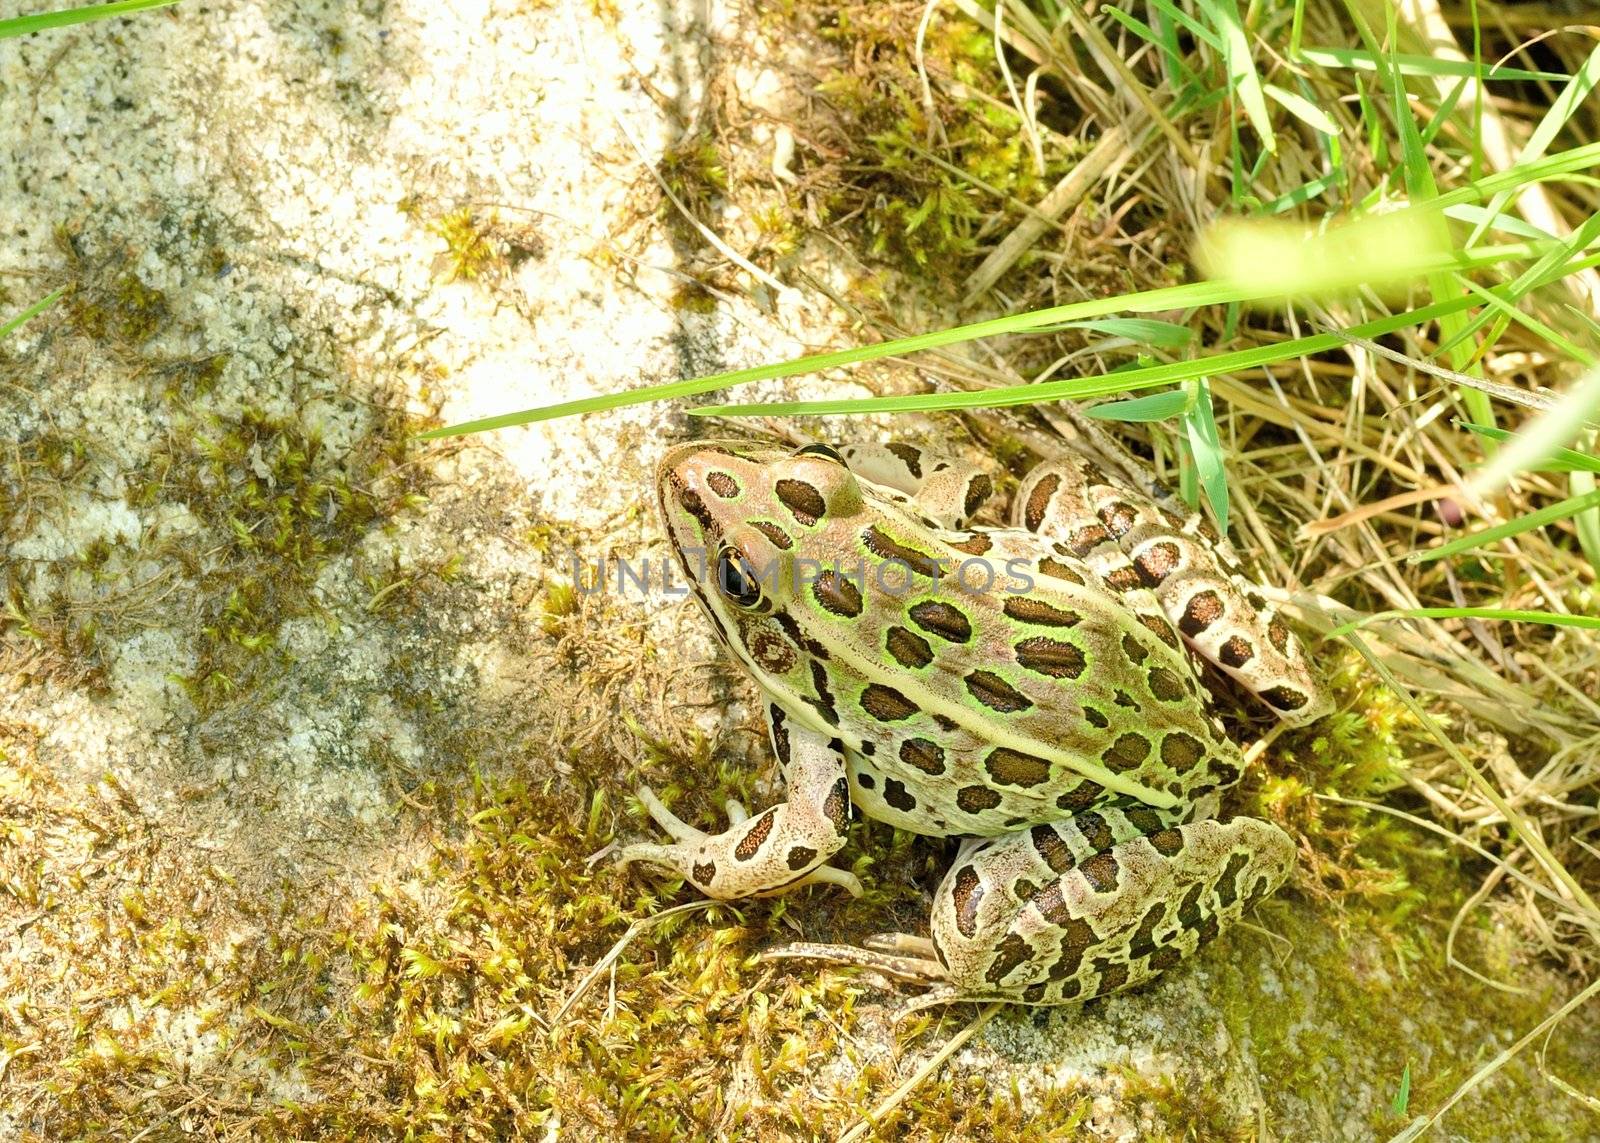 Northern Leopard Frog by brm1949